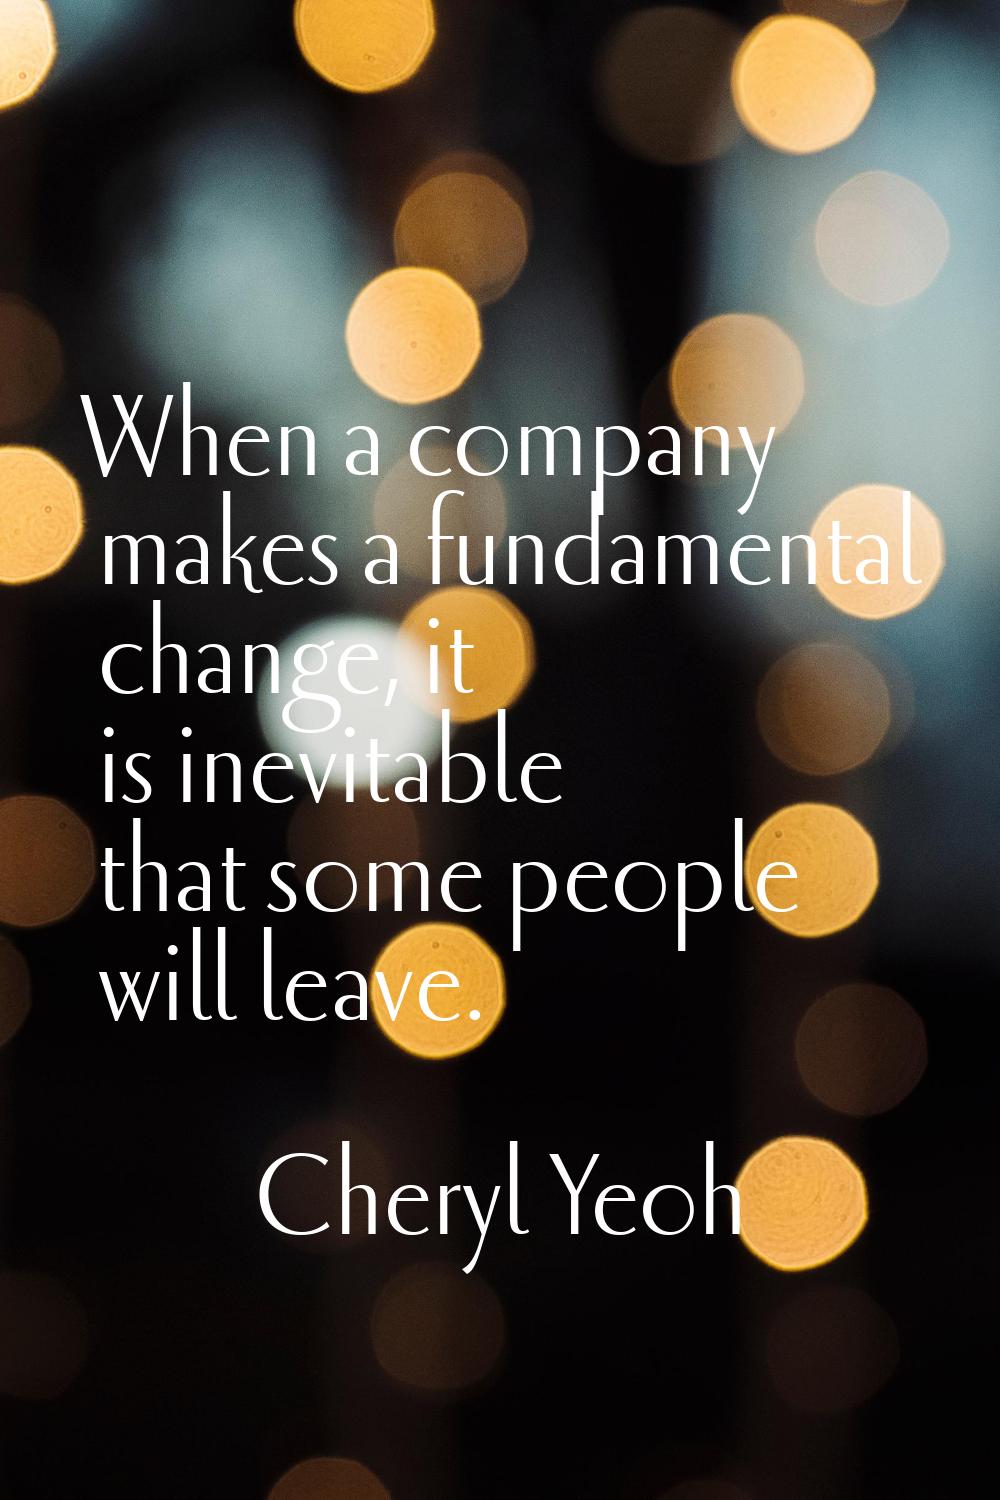 When a company makes a fundamental change, it is inevitable that some people will leave.